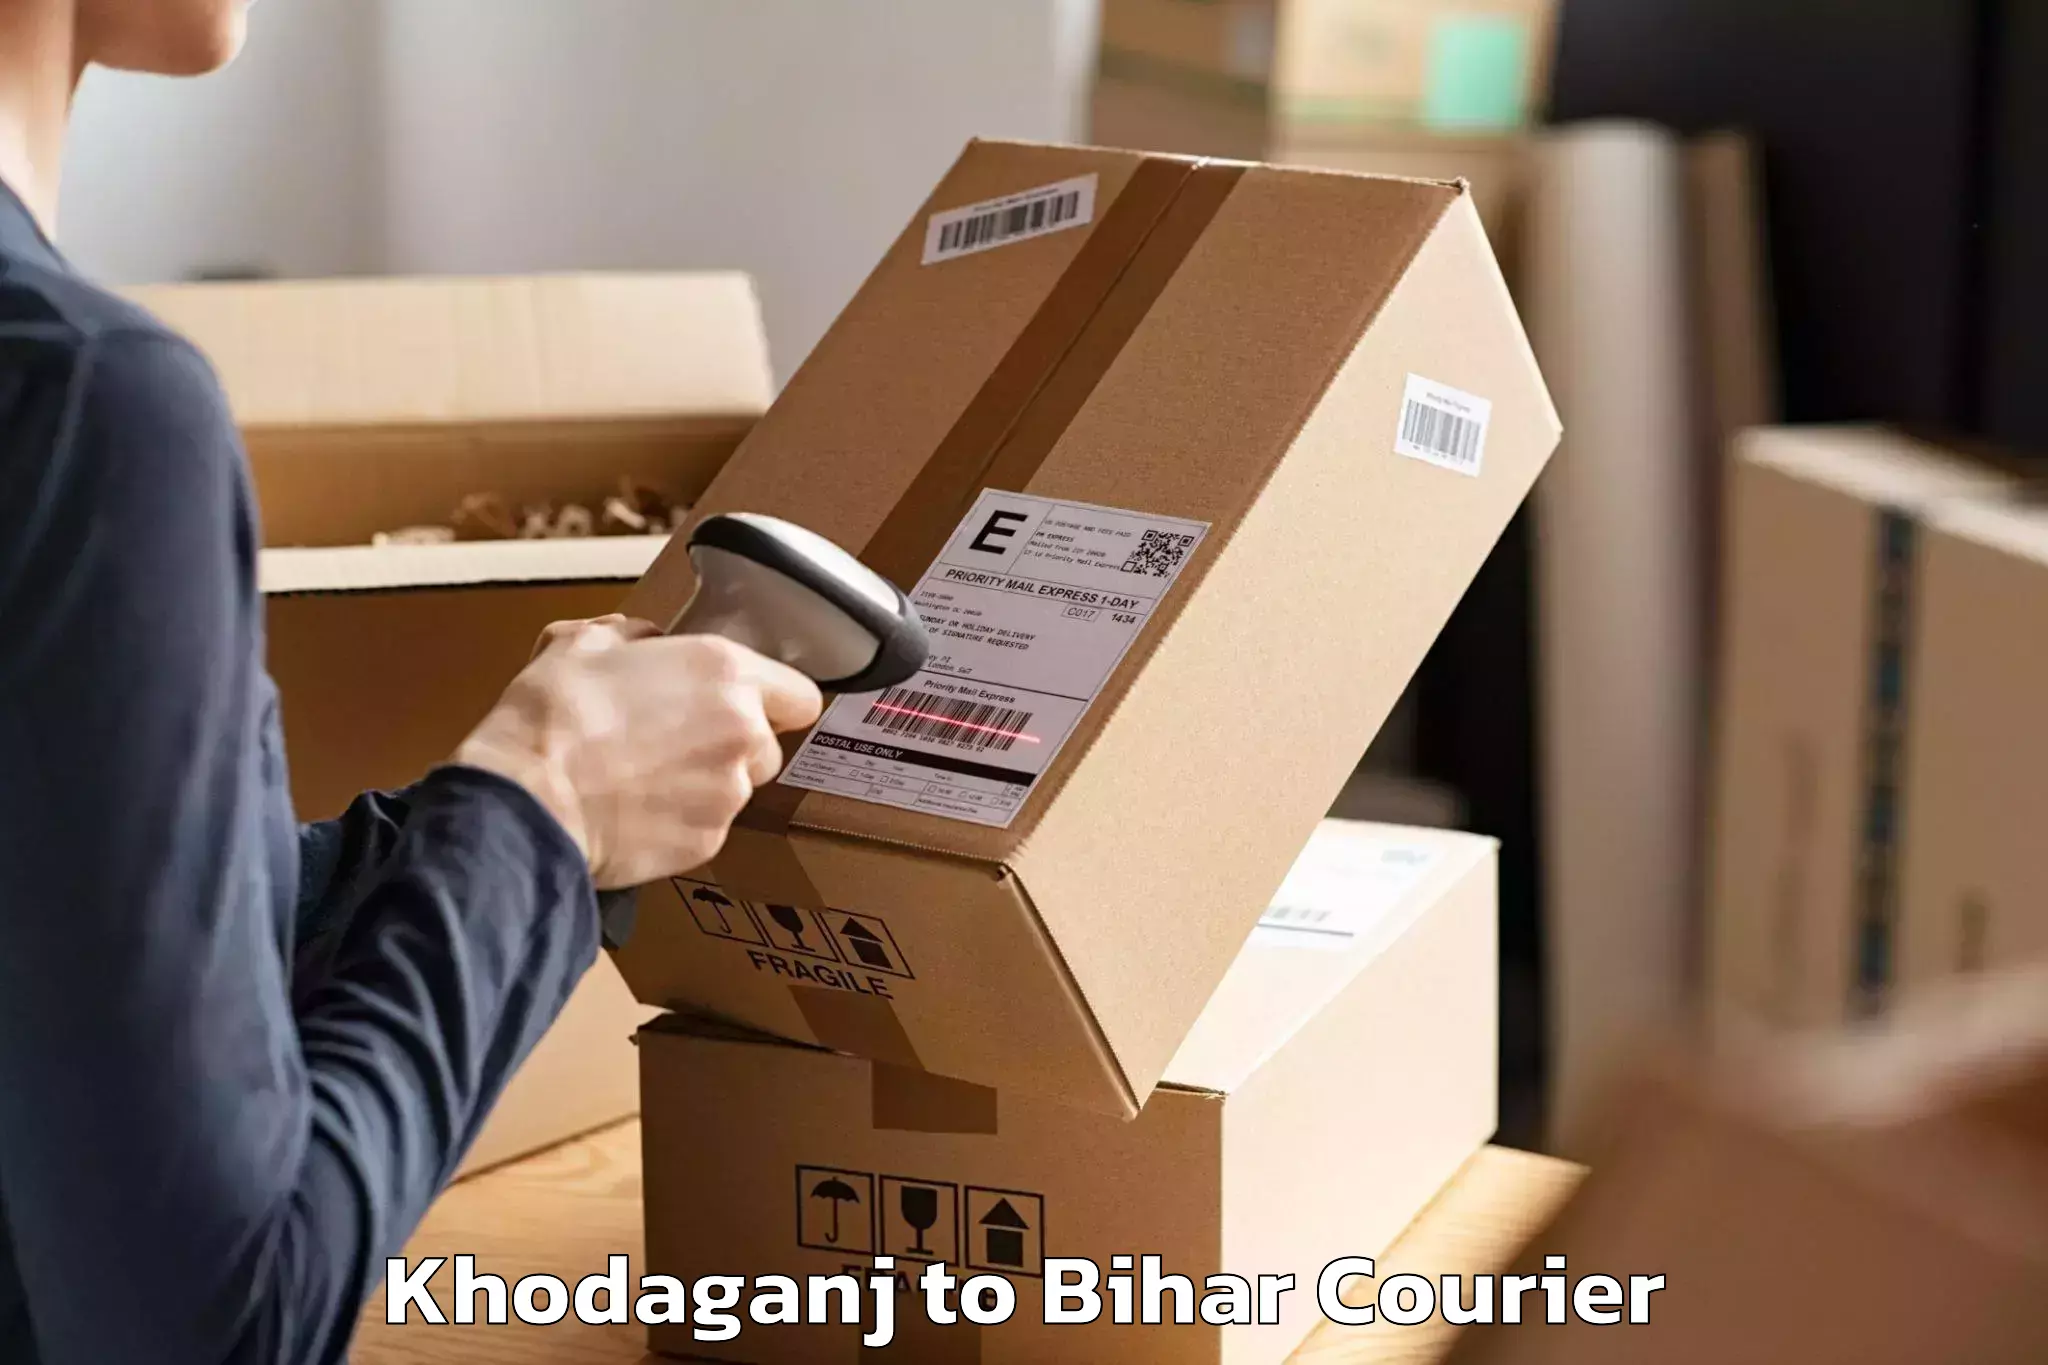 Professional movers and packers Khodaganj to Bihar